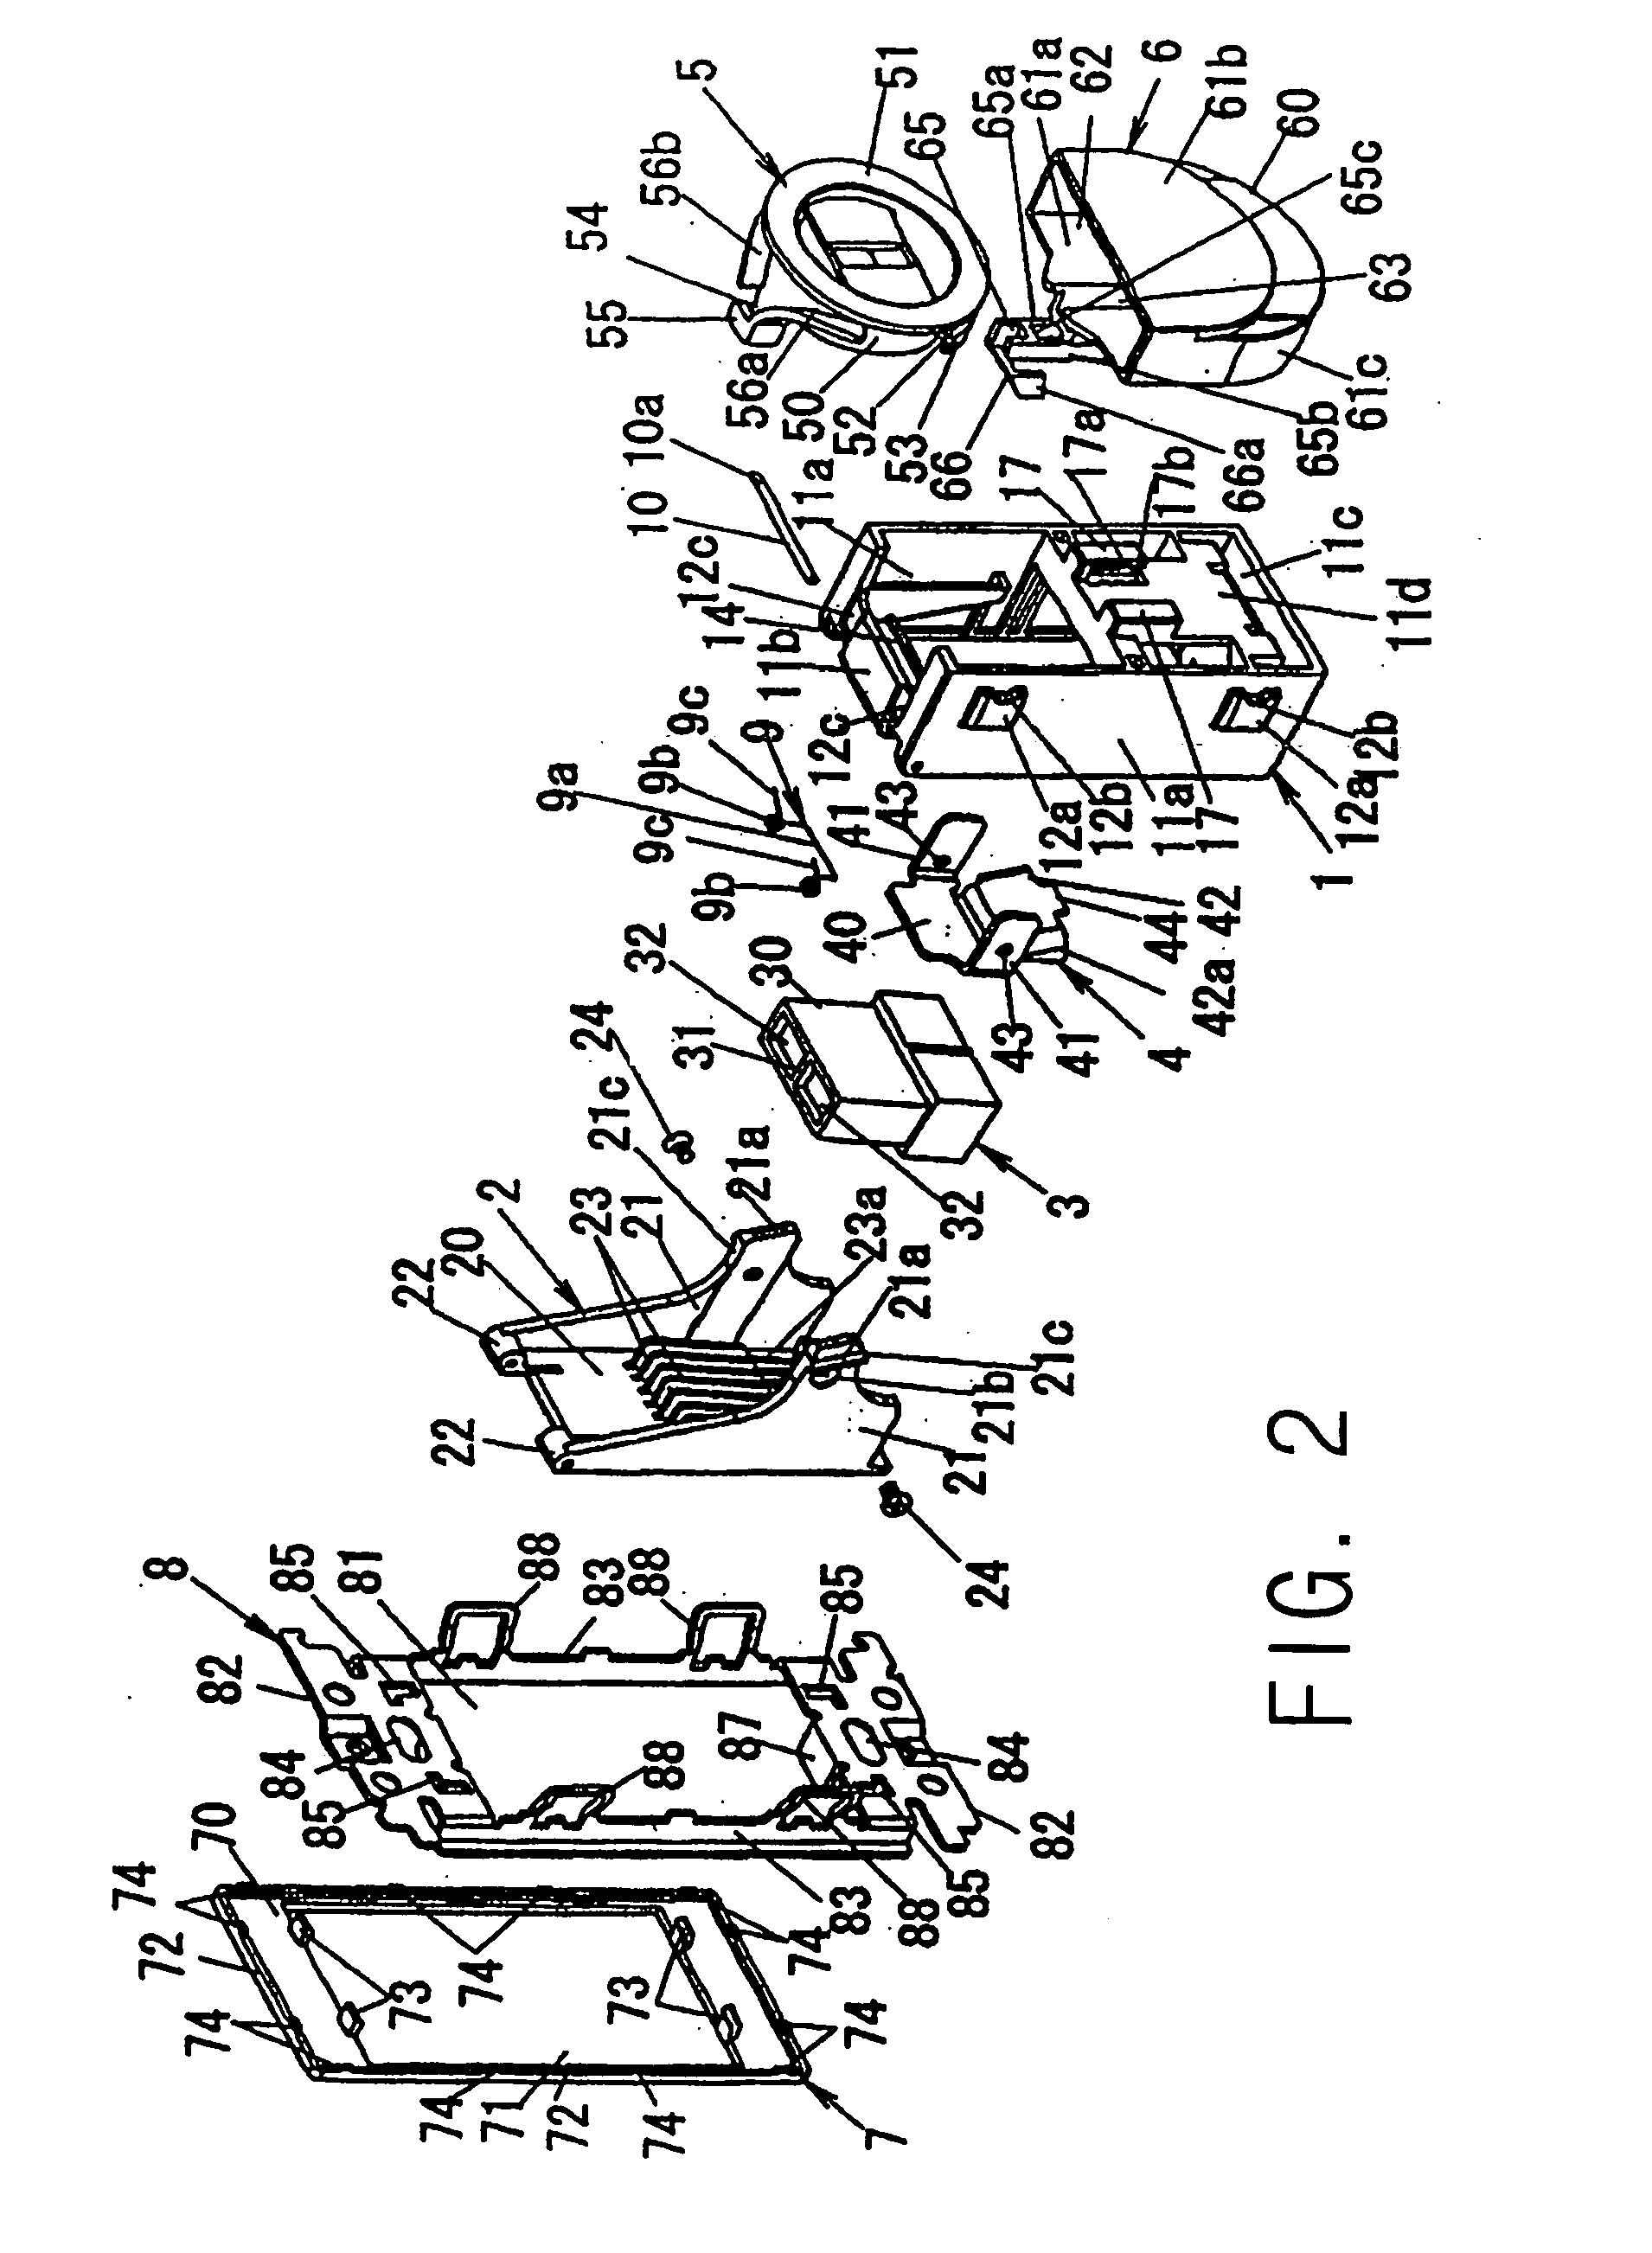 Wiring device for optical fiber